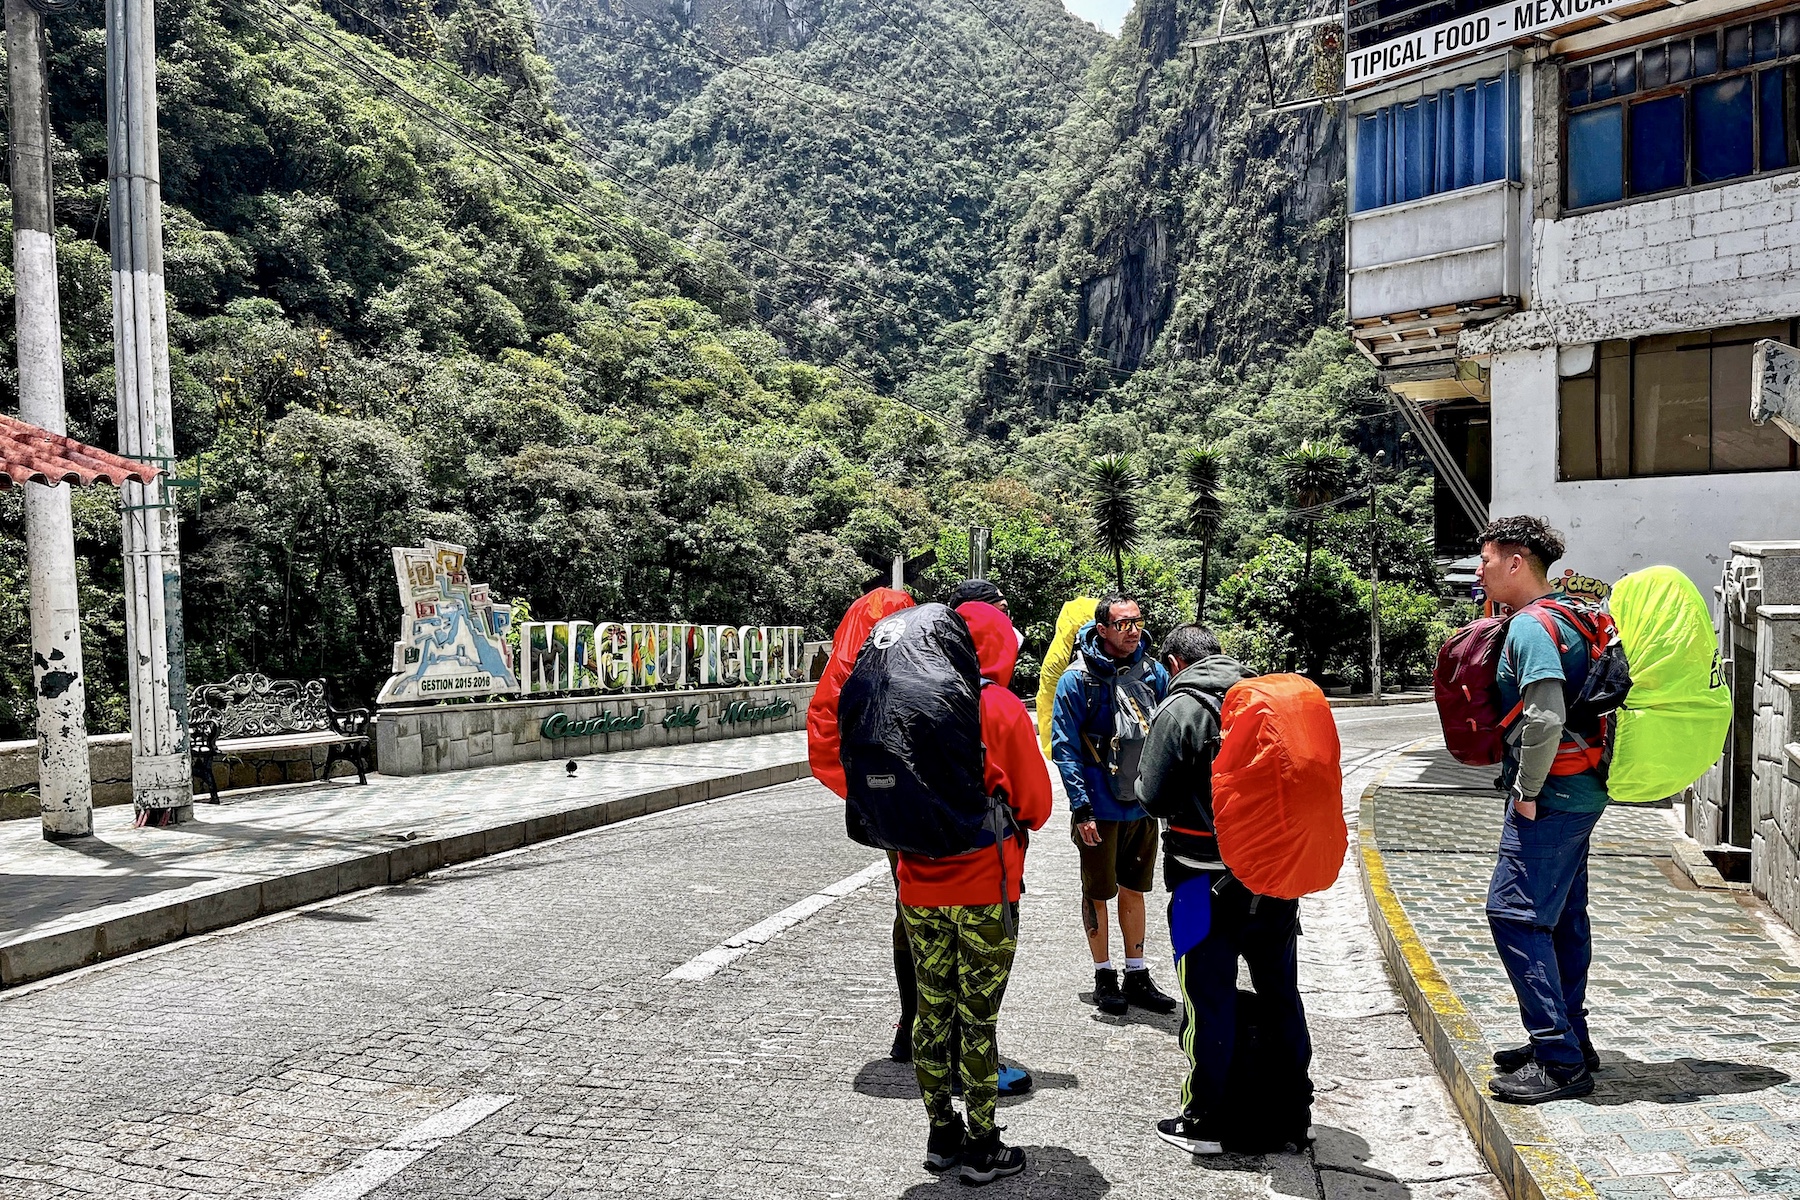 tourists at the entrance of Machu Picchu and it's now closed indefinitely